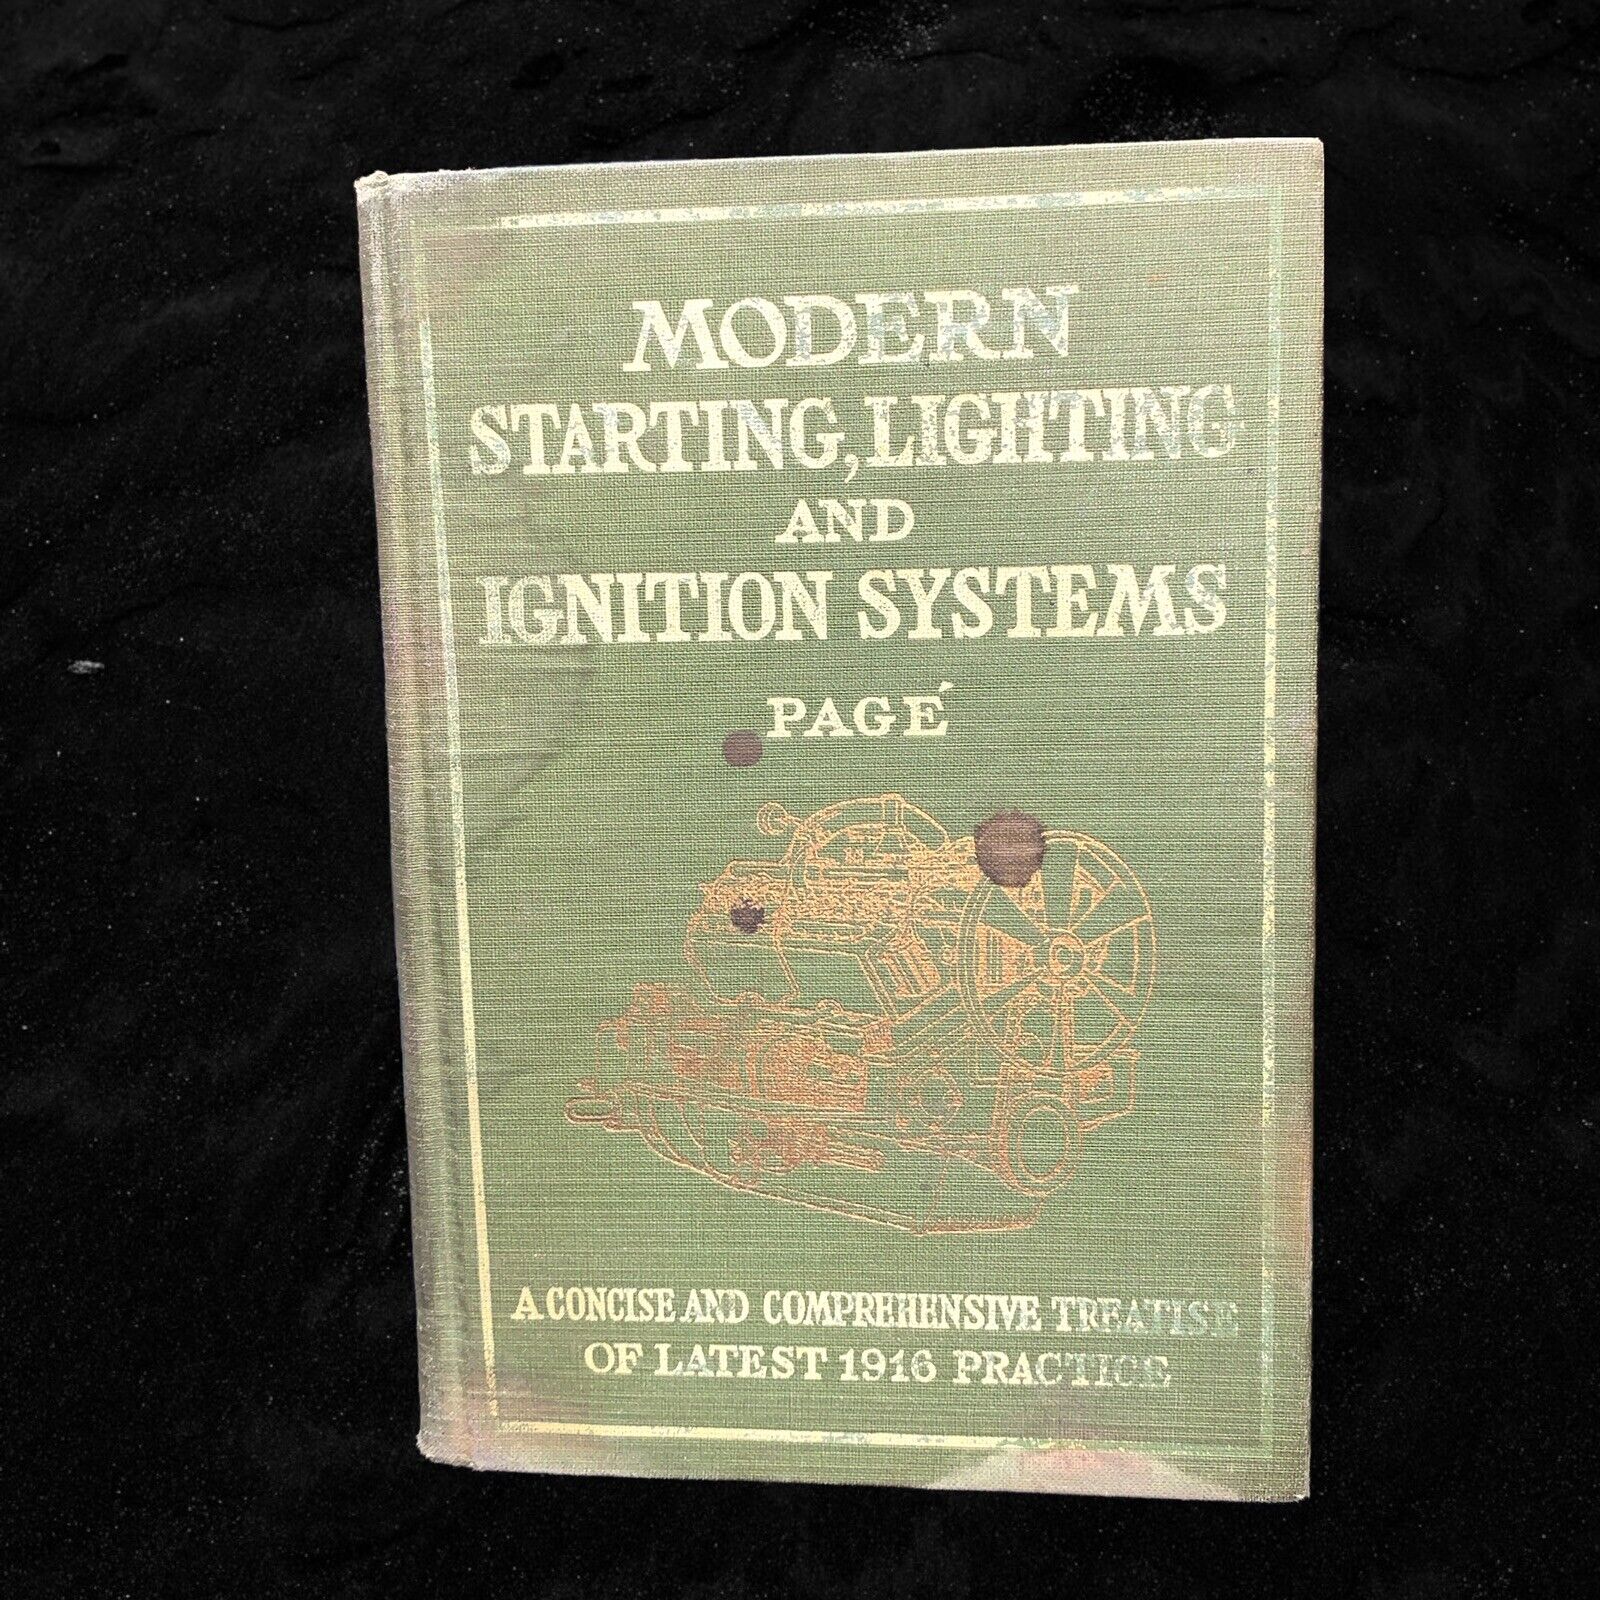 1916 Modern Starting, Lighting & Ignition Systems Latest 1916 Practices Page S3C